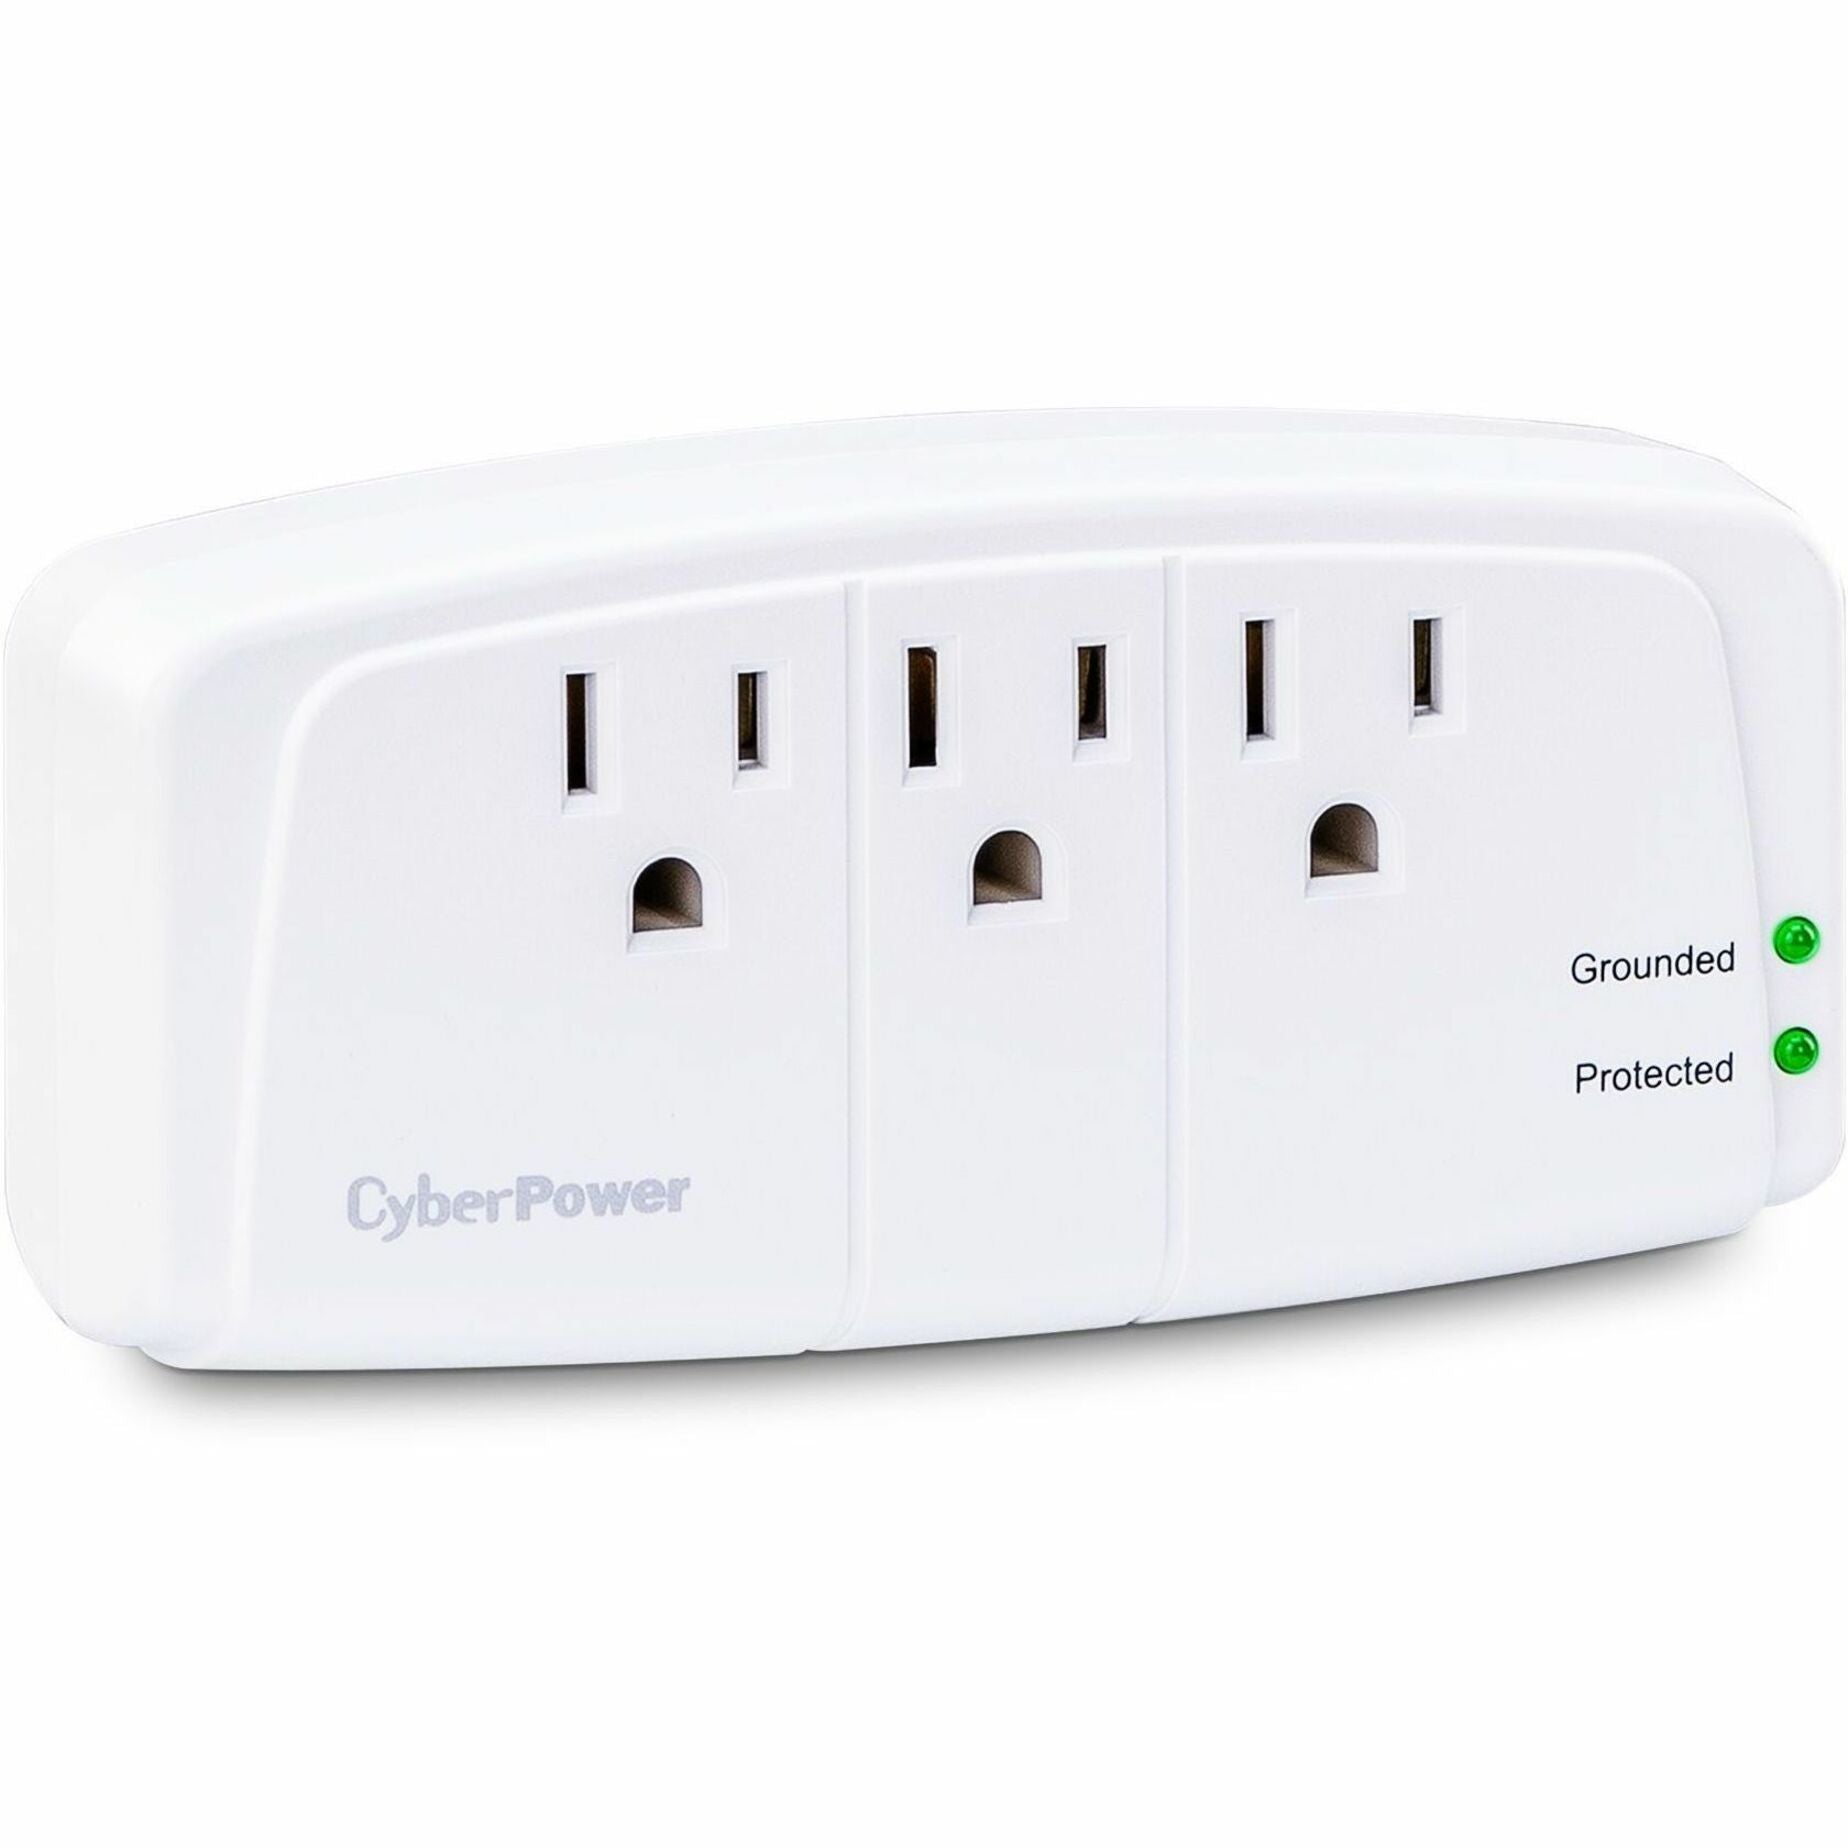 CyberPower CSB300W Essential 3-Outlets Surge Suppressor Wall Tap Plug, Lifetime Warranty, 900J Surge Energy Rating